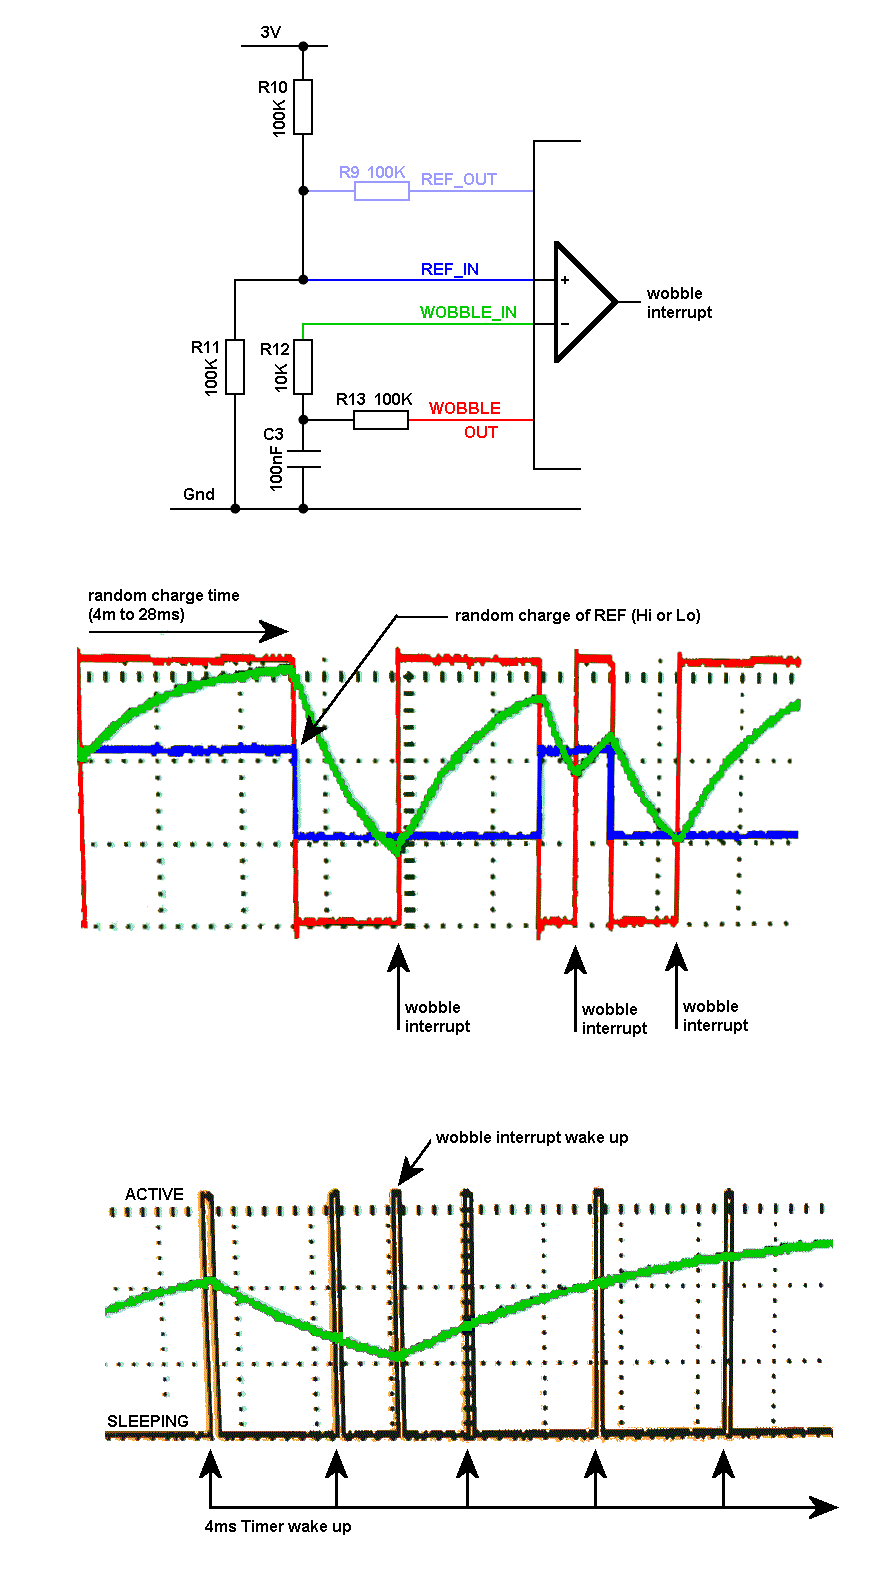 Circuit and Timing diagrams for the dice non-linear random number generator